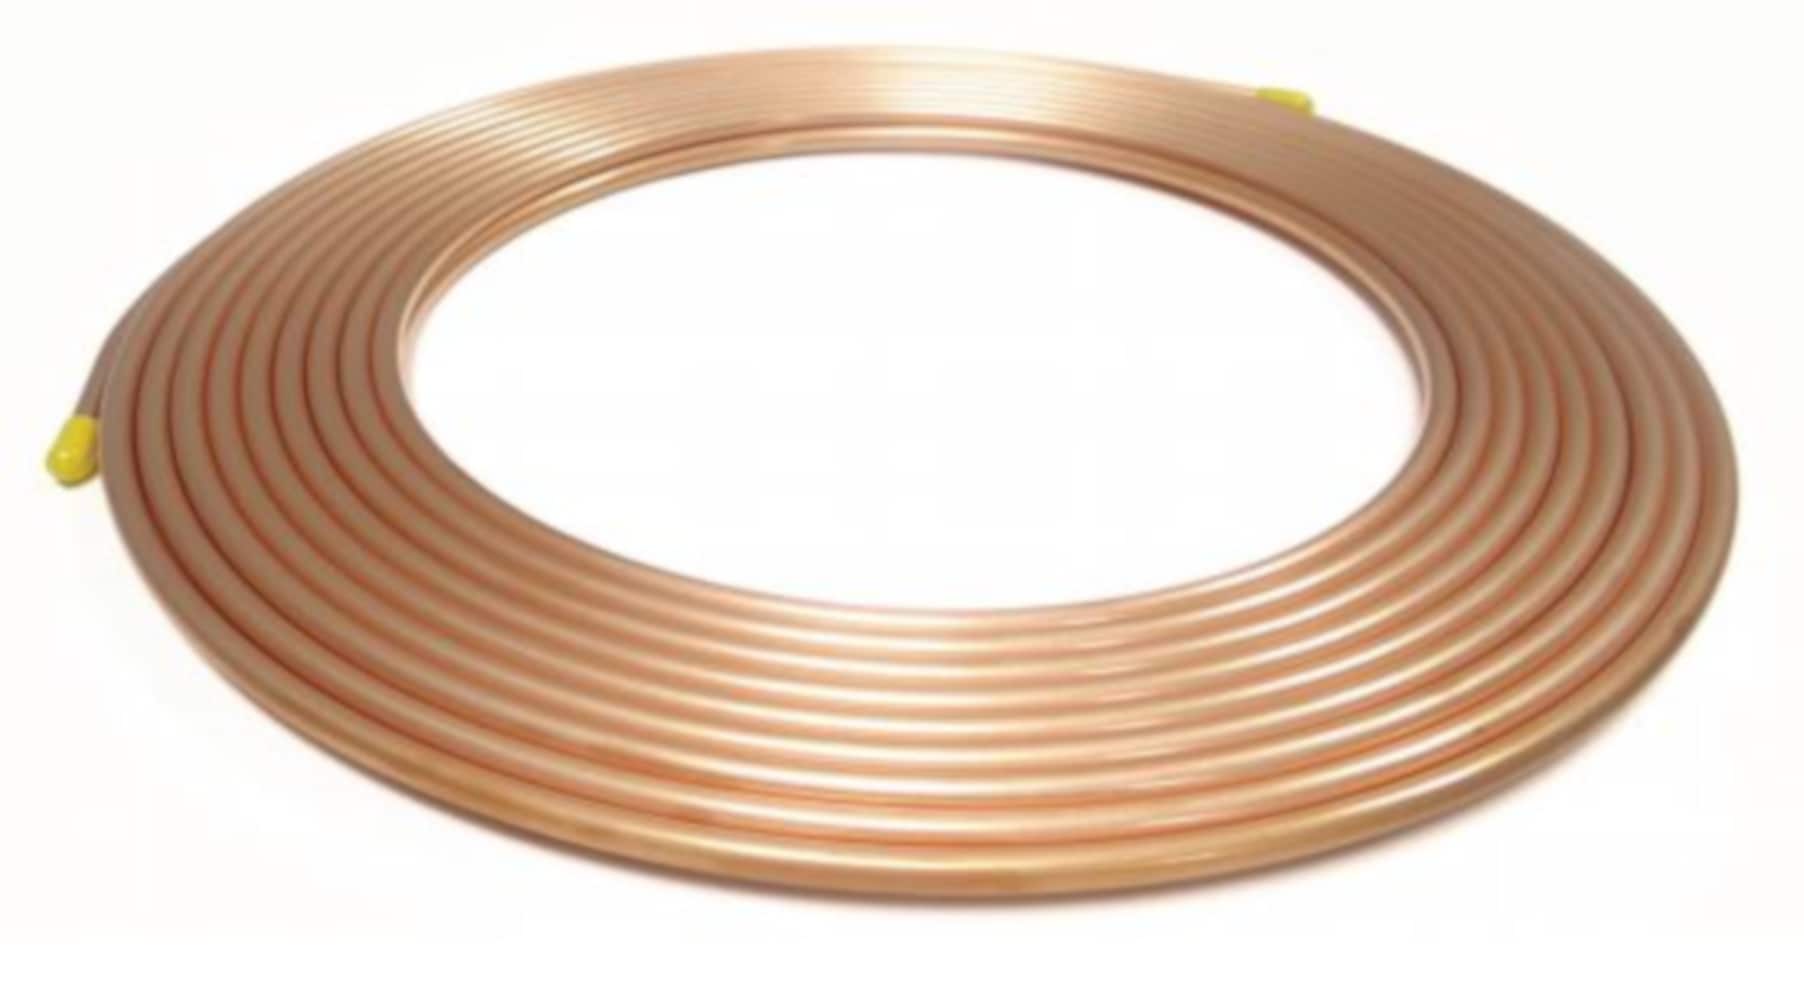 1/4 in. x 50 ft. Soft Aluminum Tubing Coil with 0.032 in. Wall Thickness